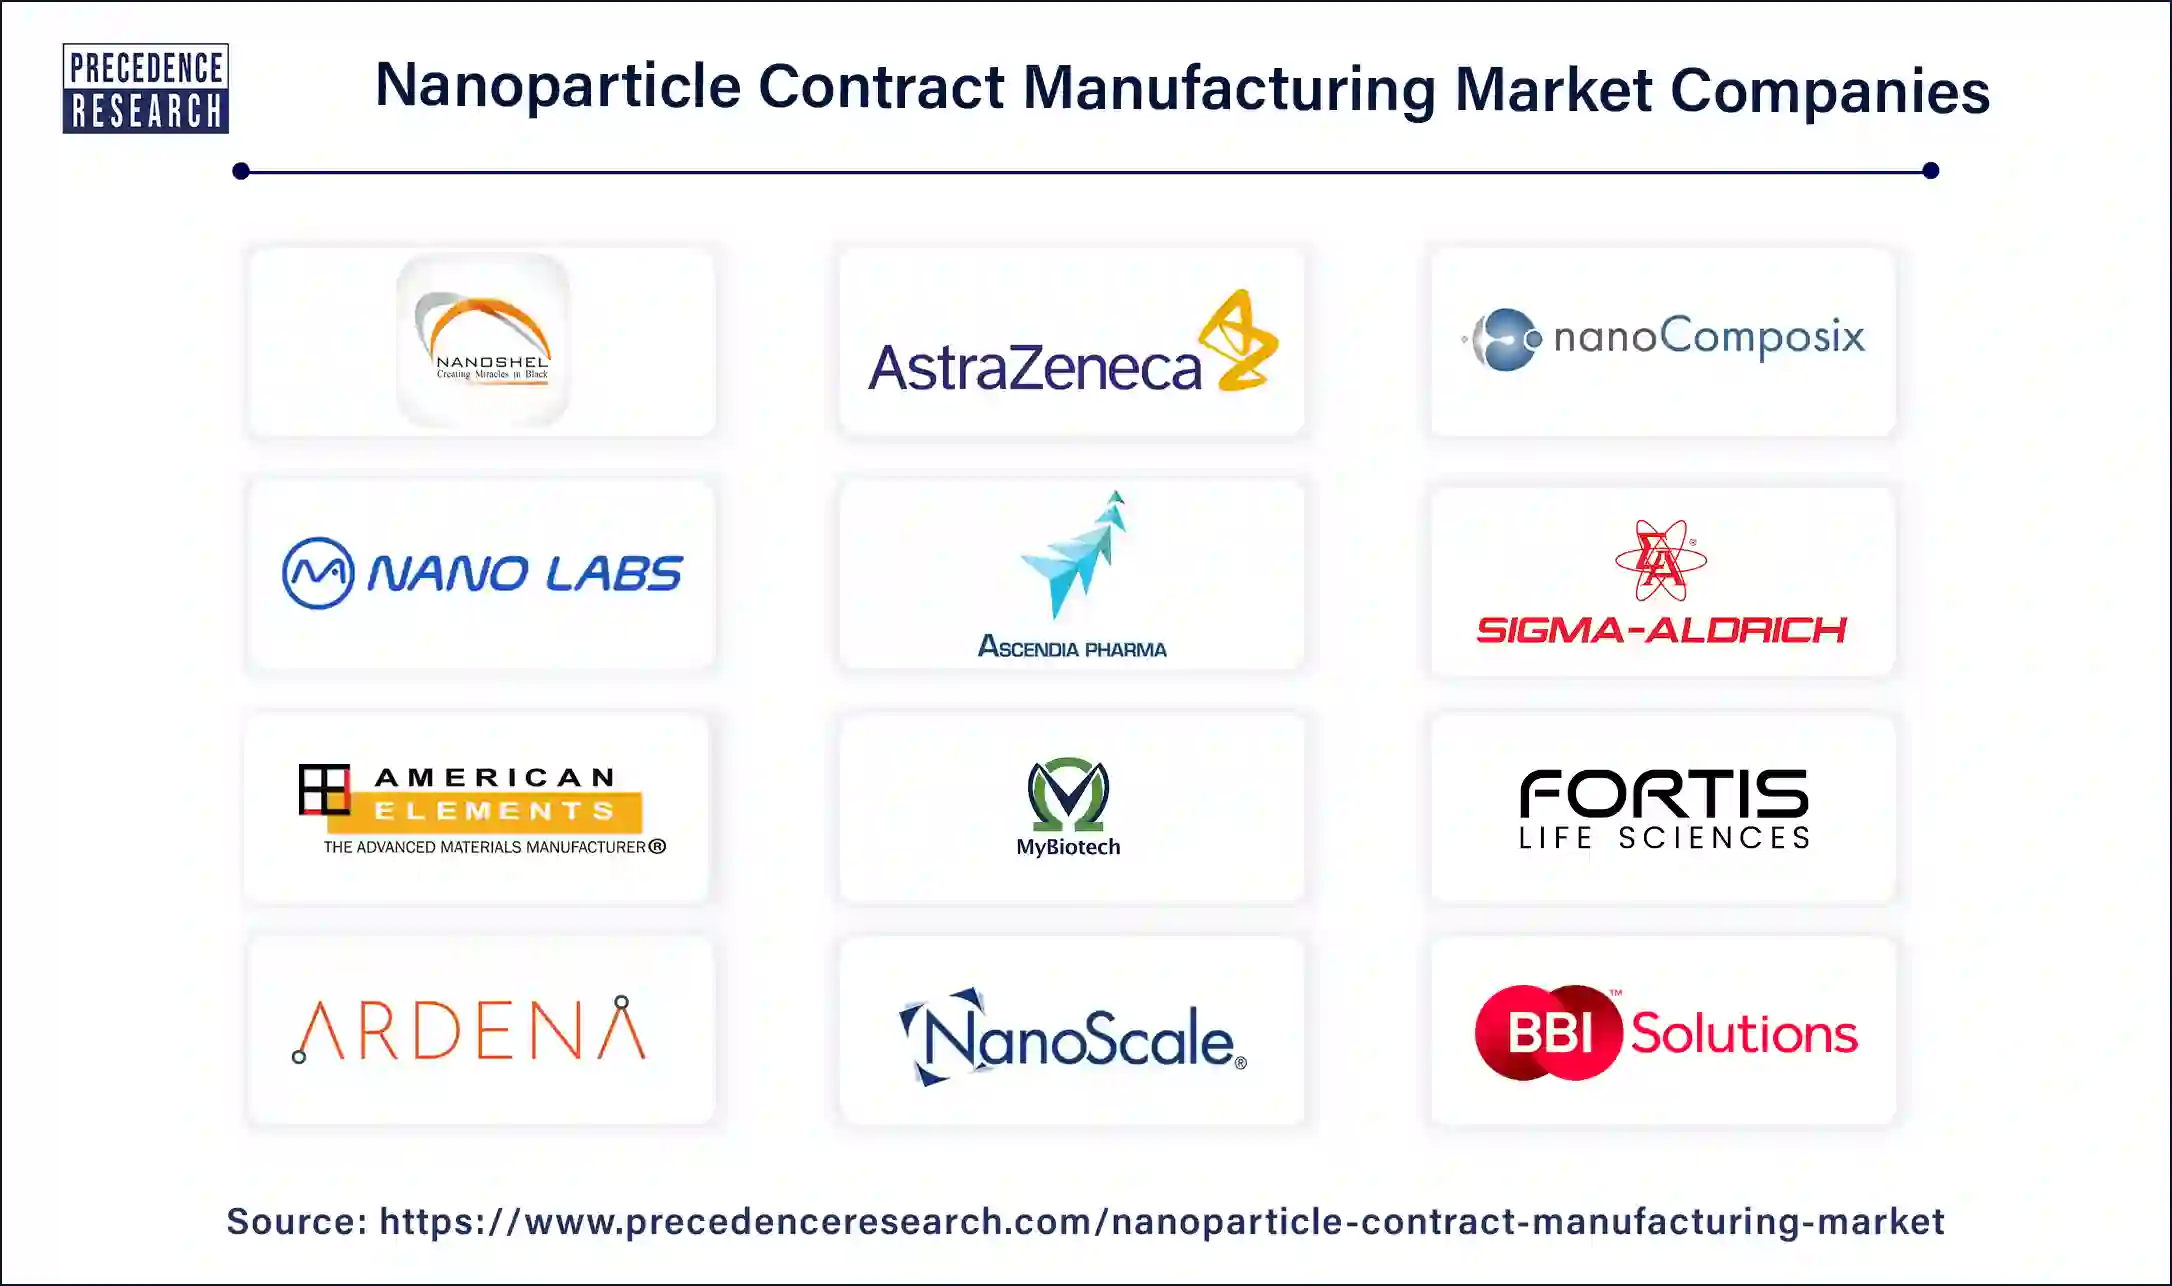 Nanoparticle Contract Manufacturing Companies